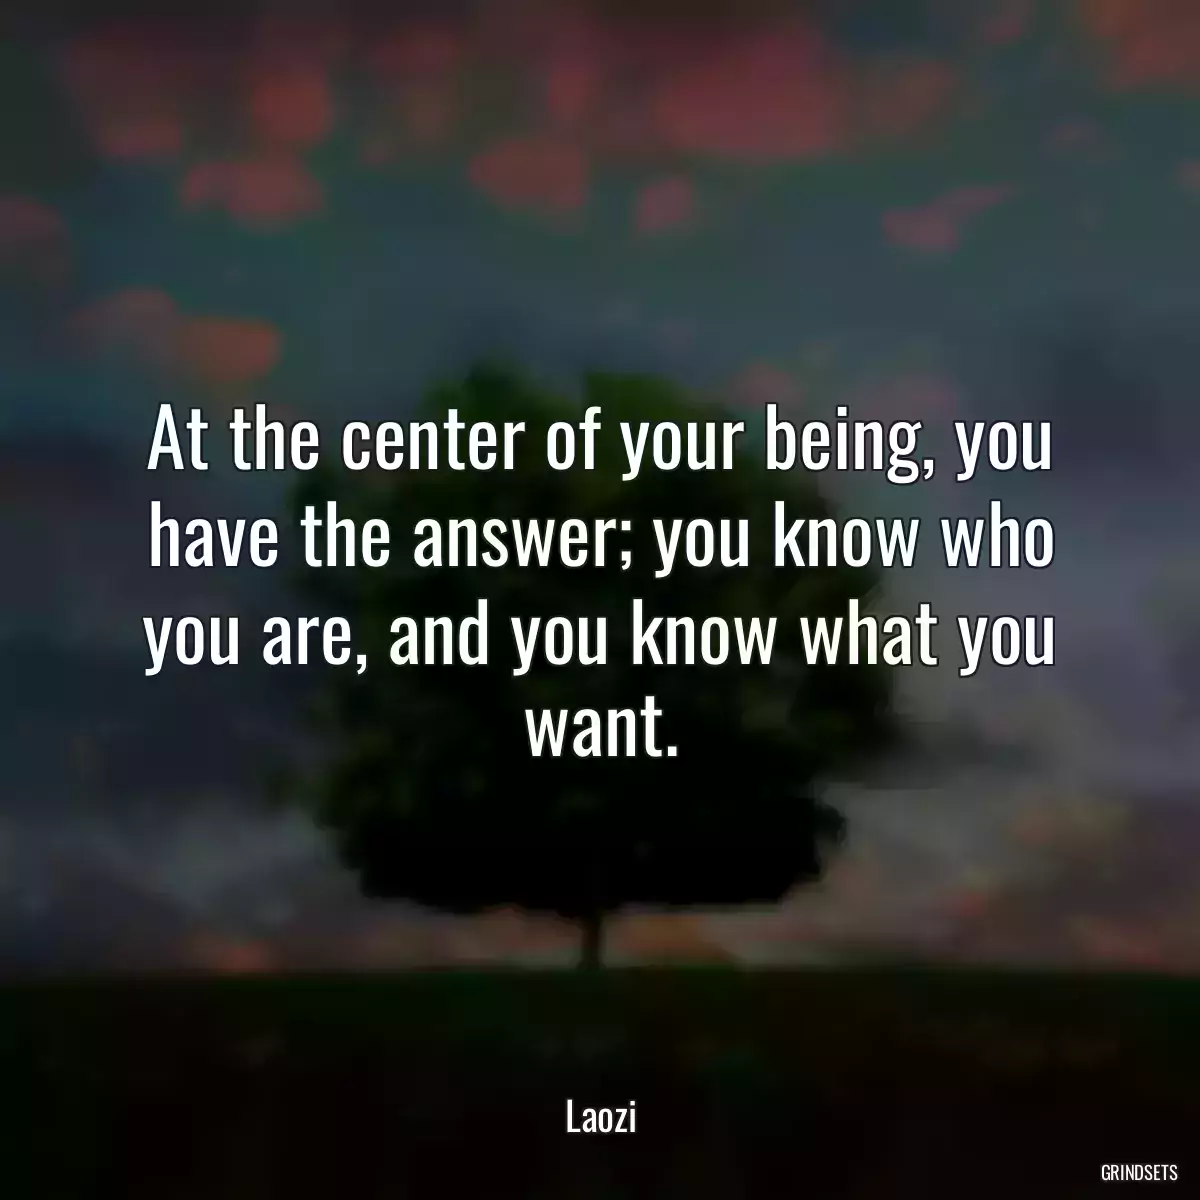 At the center of your being, you have the answer; you know who you are, and you know what you want.